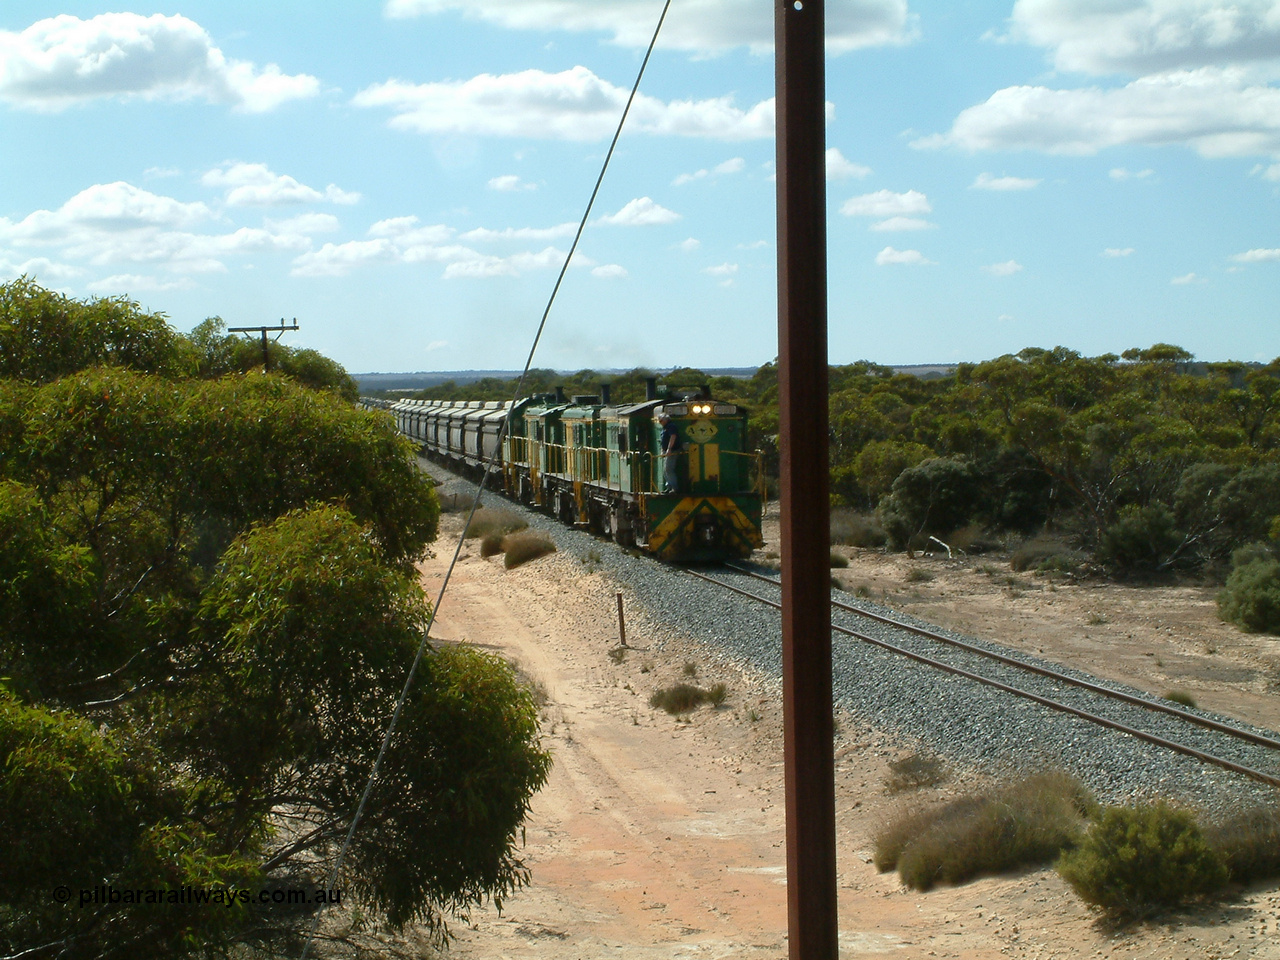 030409 110601
Caralue, loaded grain train working south of the former station site while one driver has a smoke, 830 class unit 851 AE Goodwin ALCo model DL531 serial 84137, 851 has spent its entire operating career on the Eyre Peninsula, it leads fellow 830 class 842 serial 84140 and a rebuilt unit DA 4, rebuilt from 830 class unit 839 by Port Augusta Workshops, retains original serial 83730 and model DL531.
Keywords: 830-class;851;84137;AE-Goodwin;ALCo;DL531;